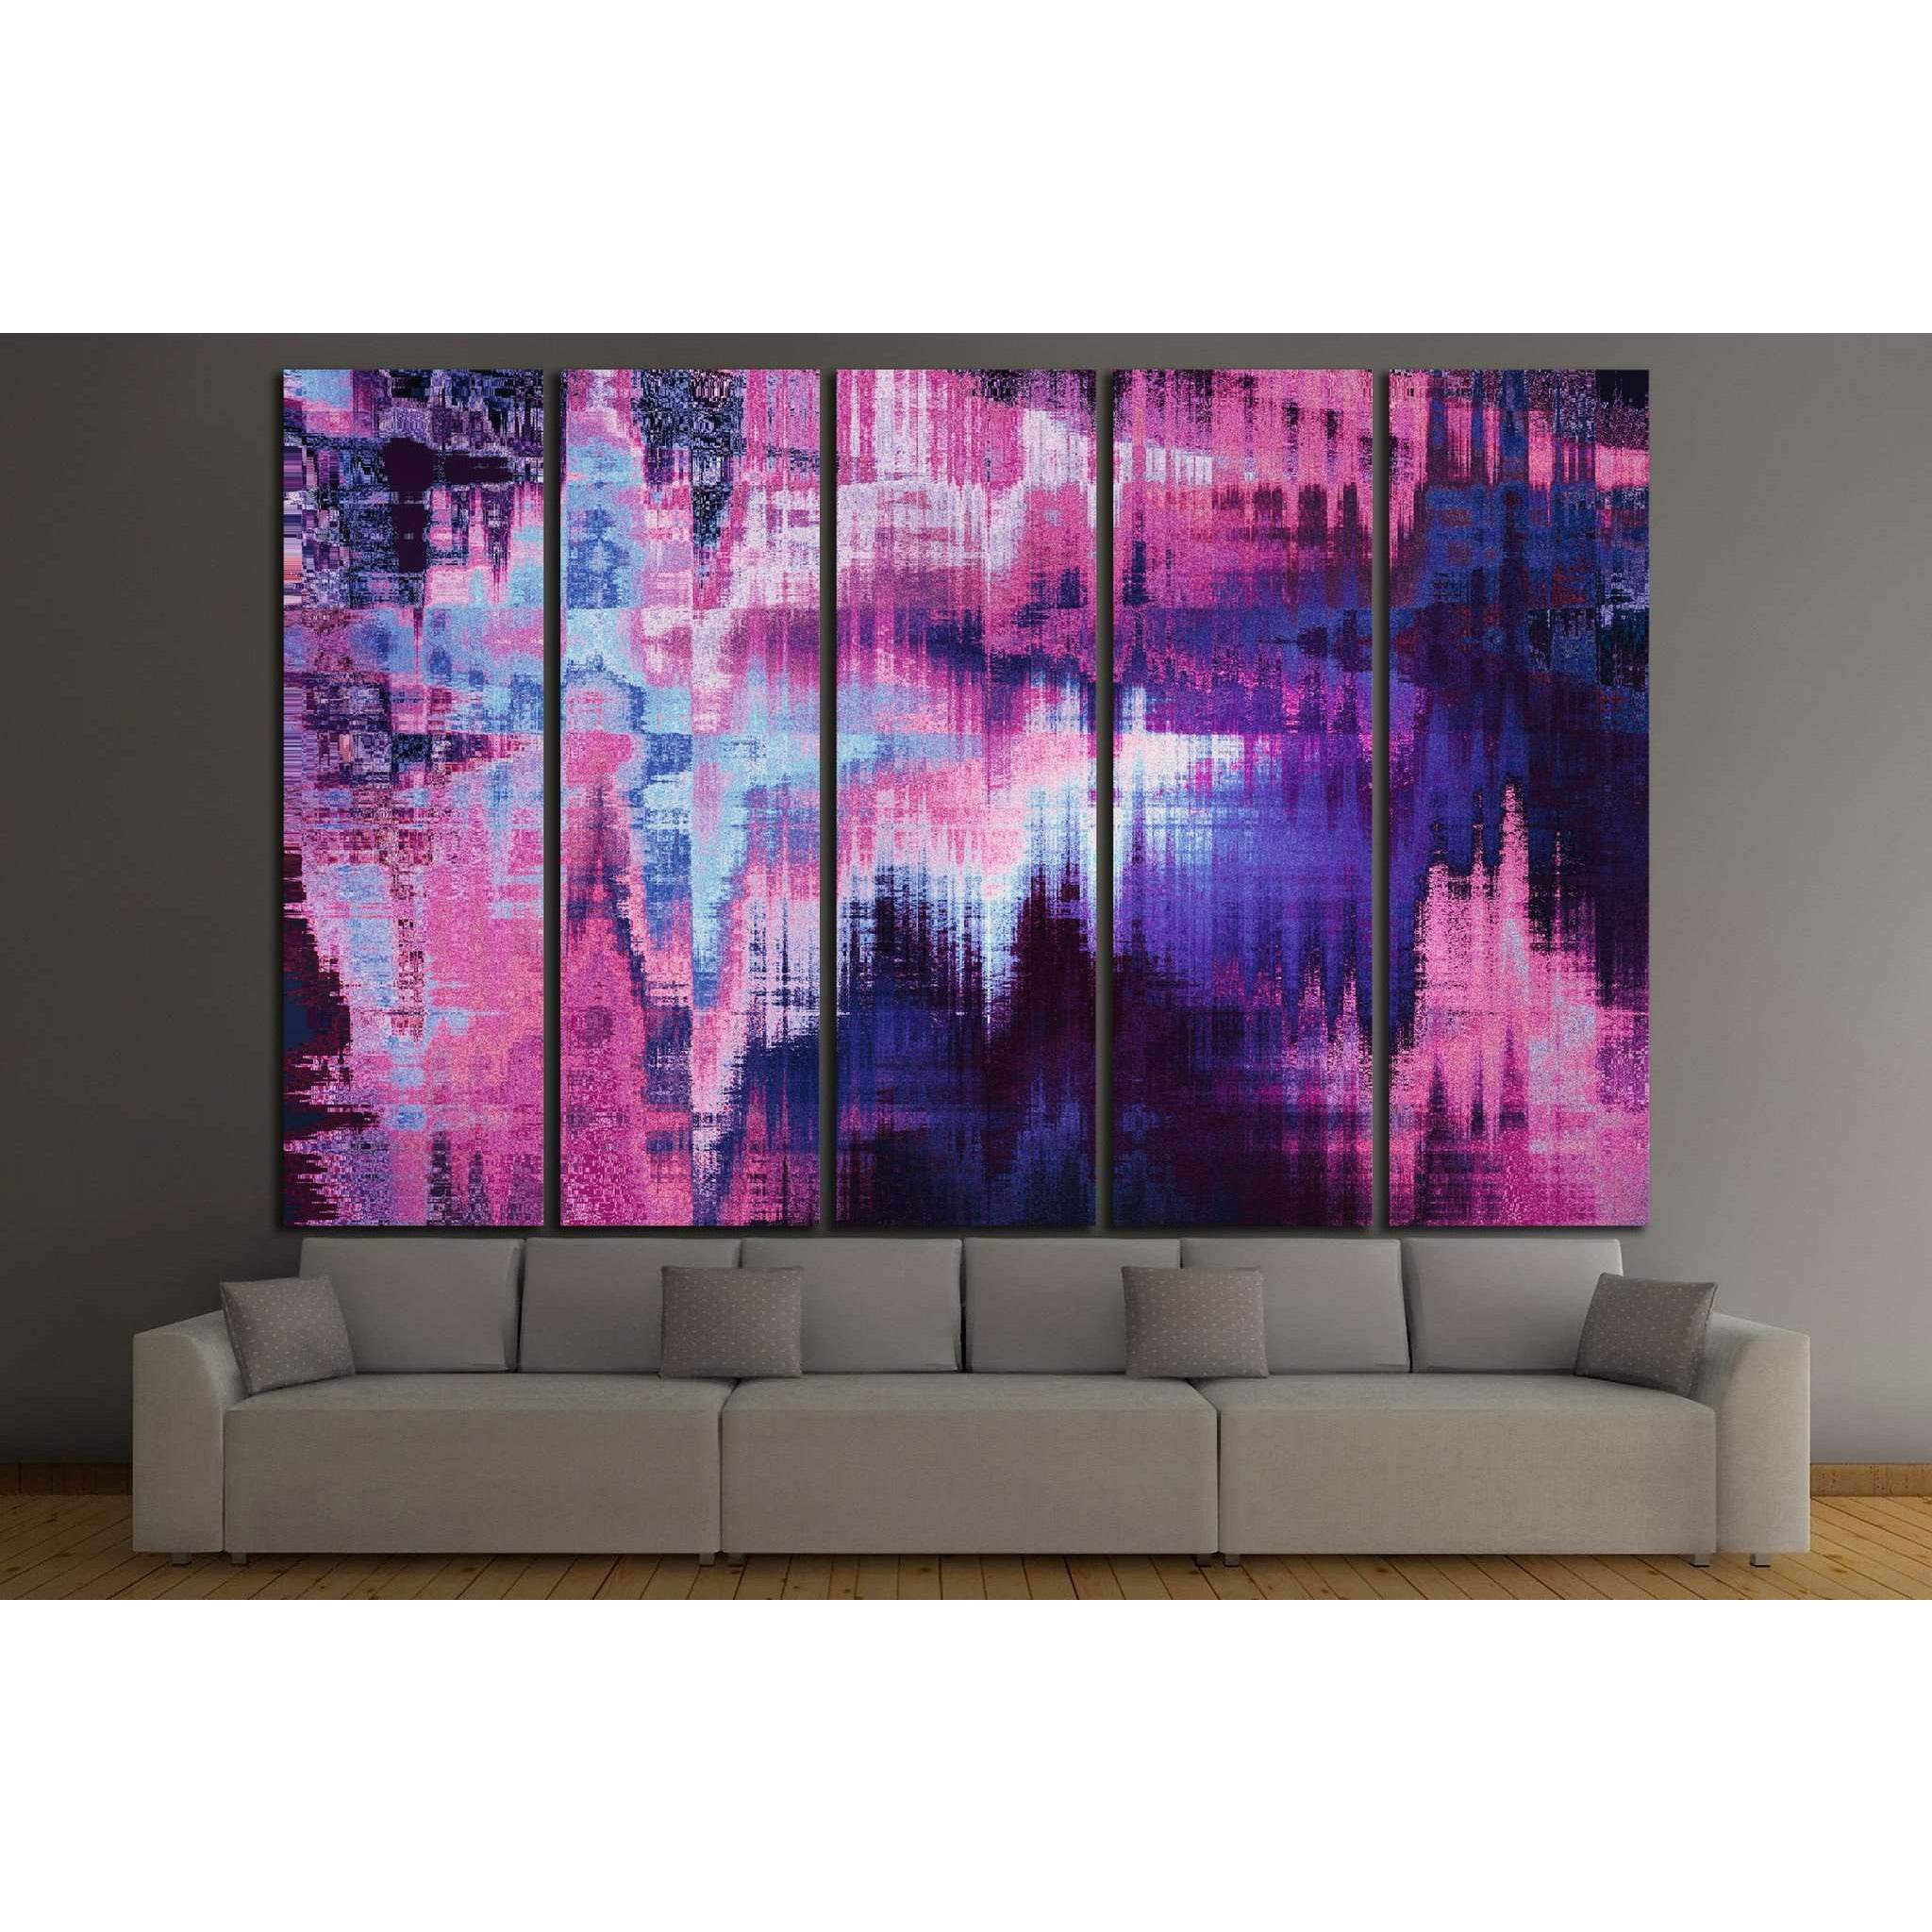 violet blurred abstract background №1424 Ready to Hang Canvas Print